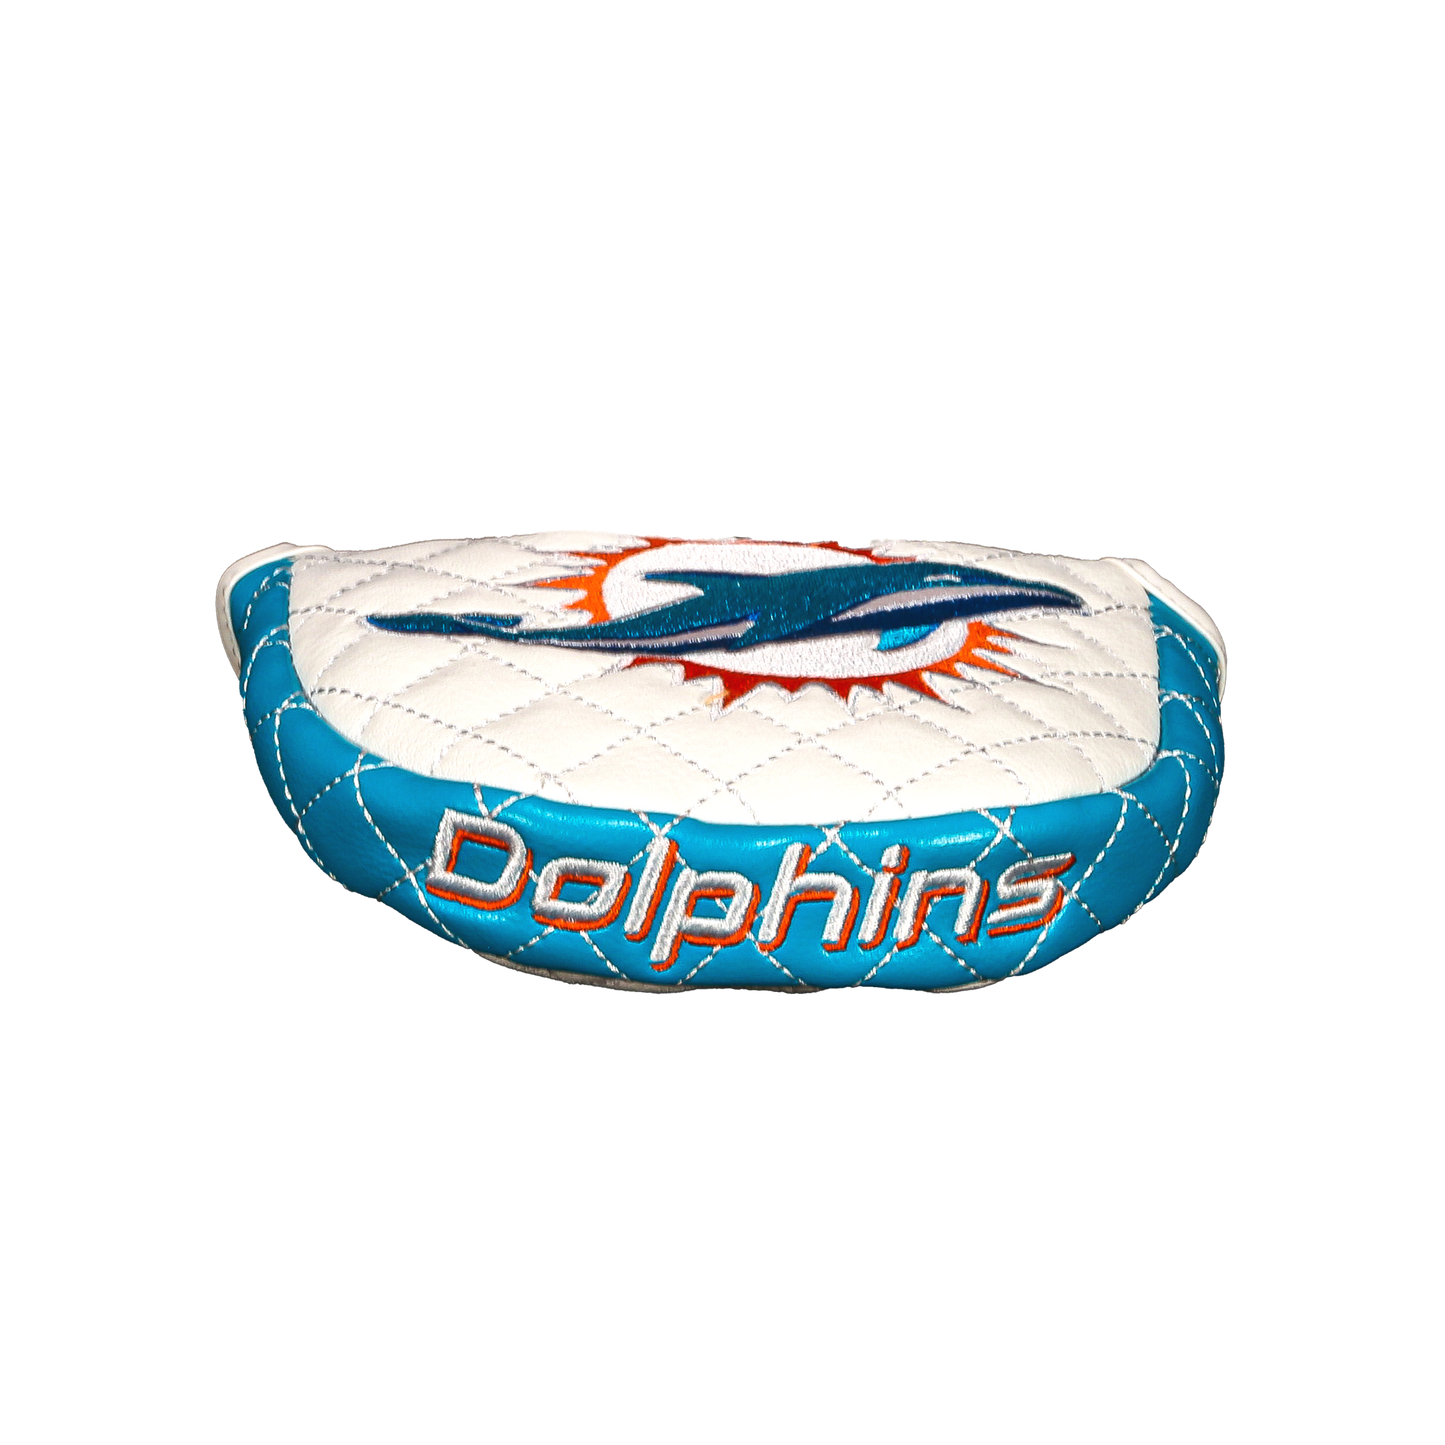 Miami "Dolphins" Mallet Putter Cover